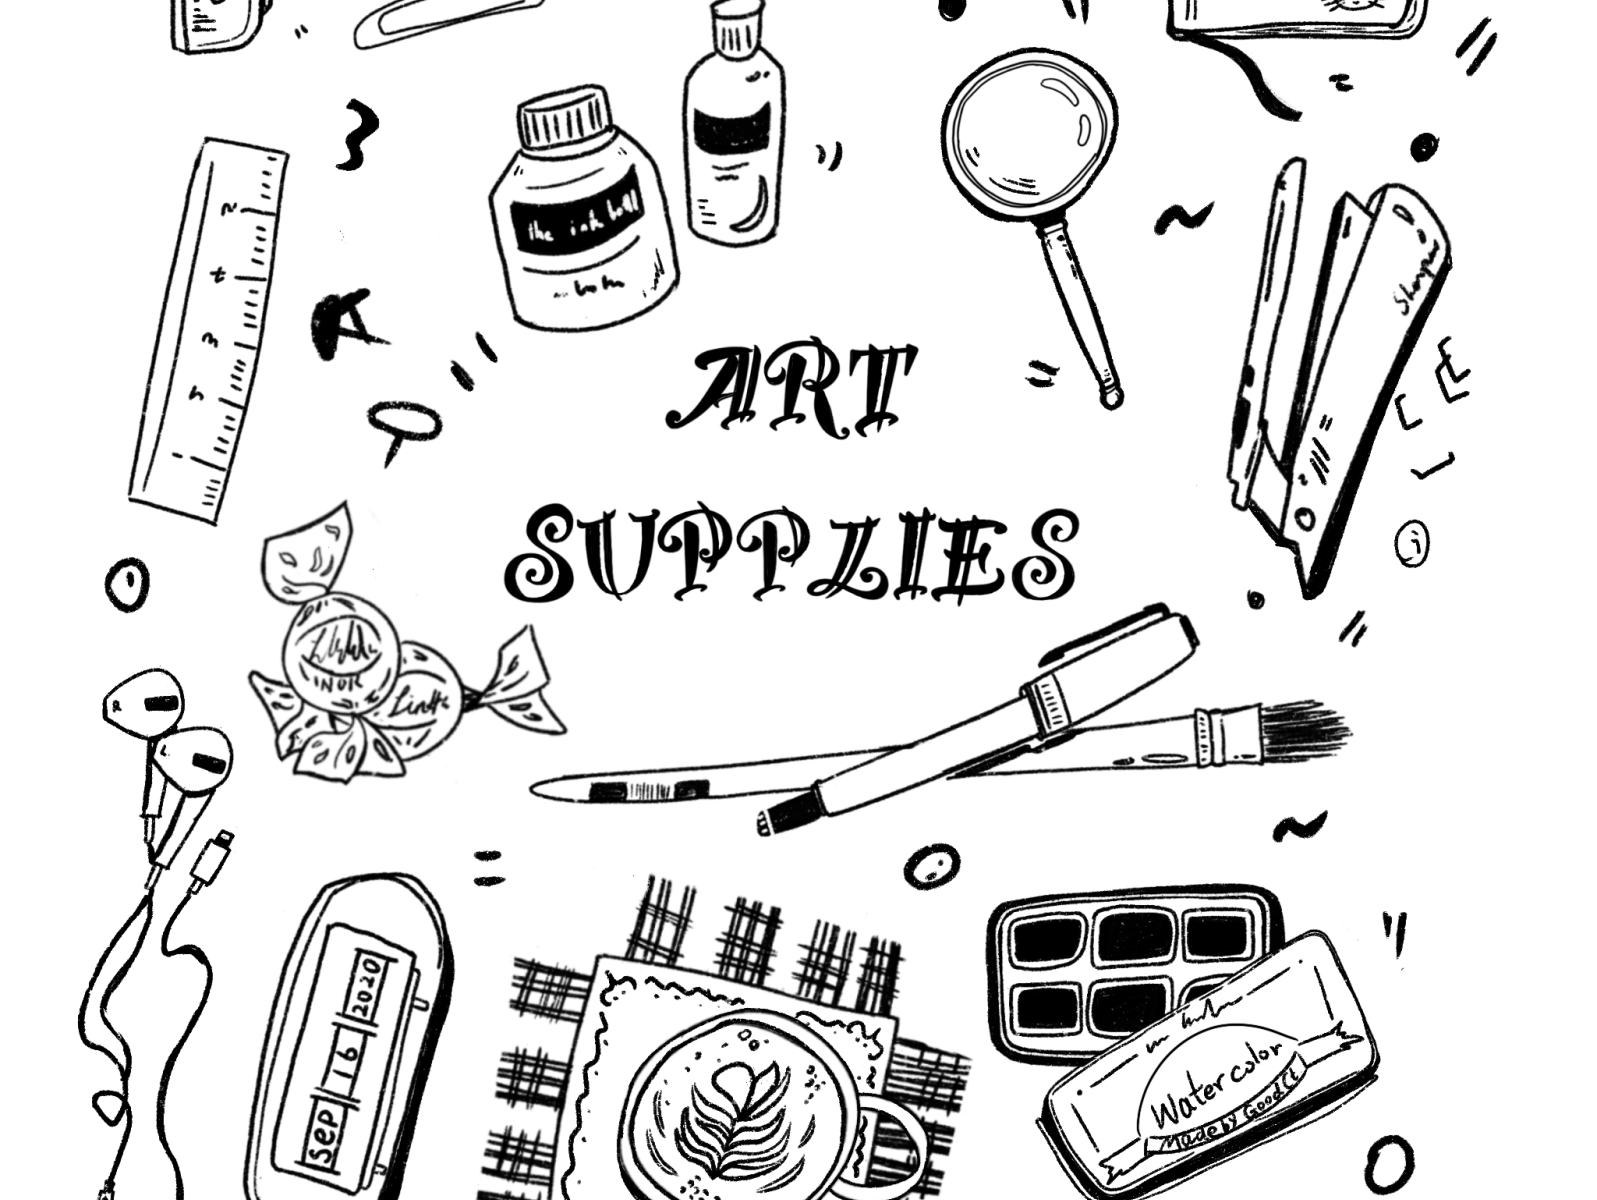 art-supplies-doodling-by-anne-l-on-dribbble